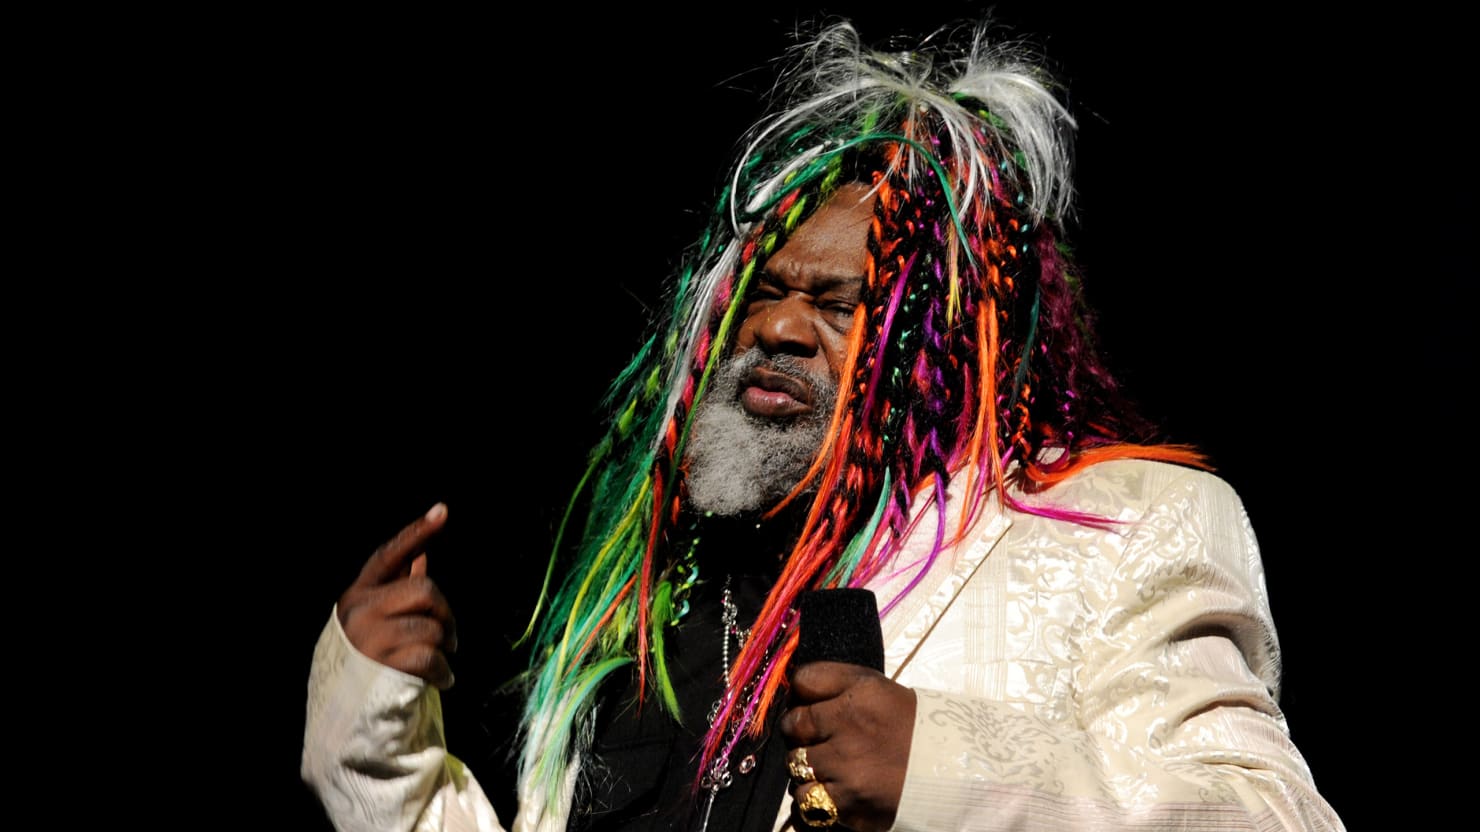 George Clinton on Industry ‘Mobsters’ and How Nobody Wants to Listen to a Crackhead1480 x 832